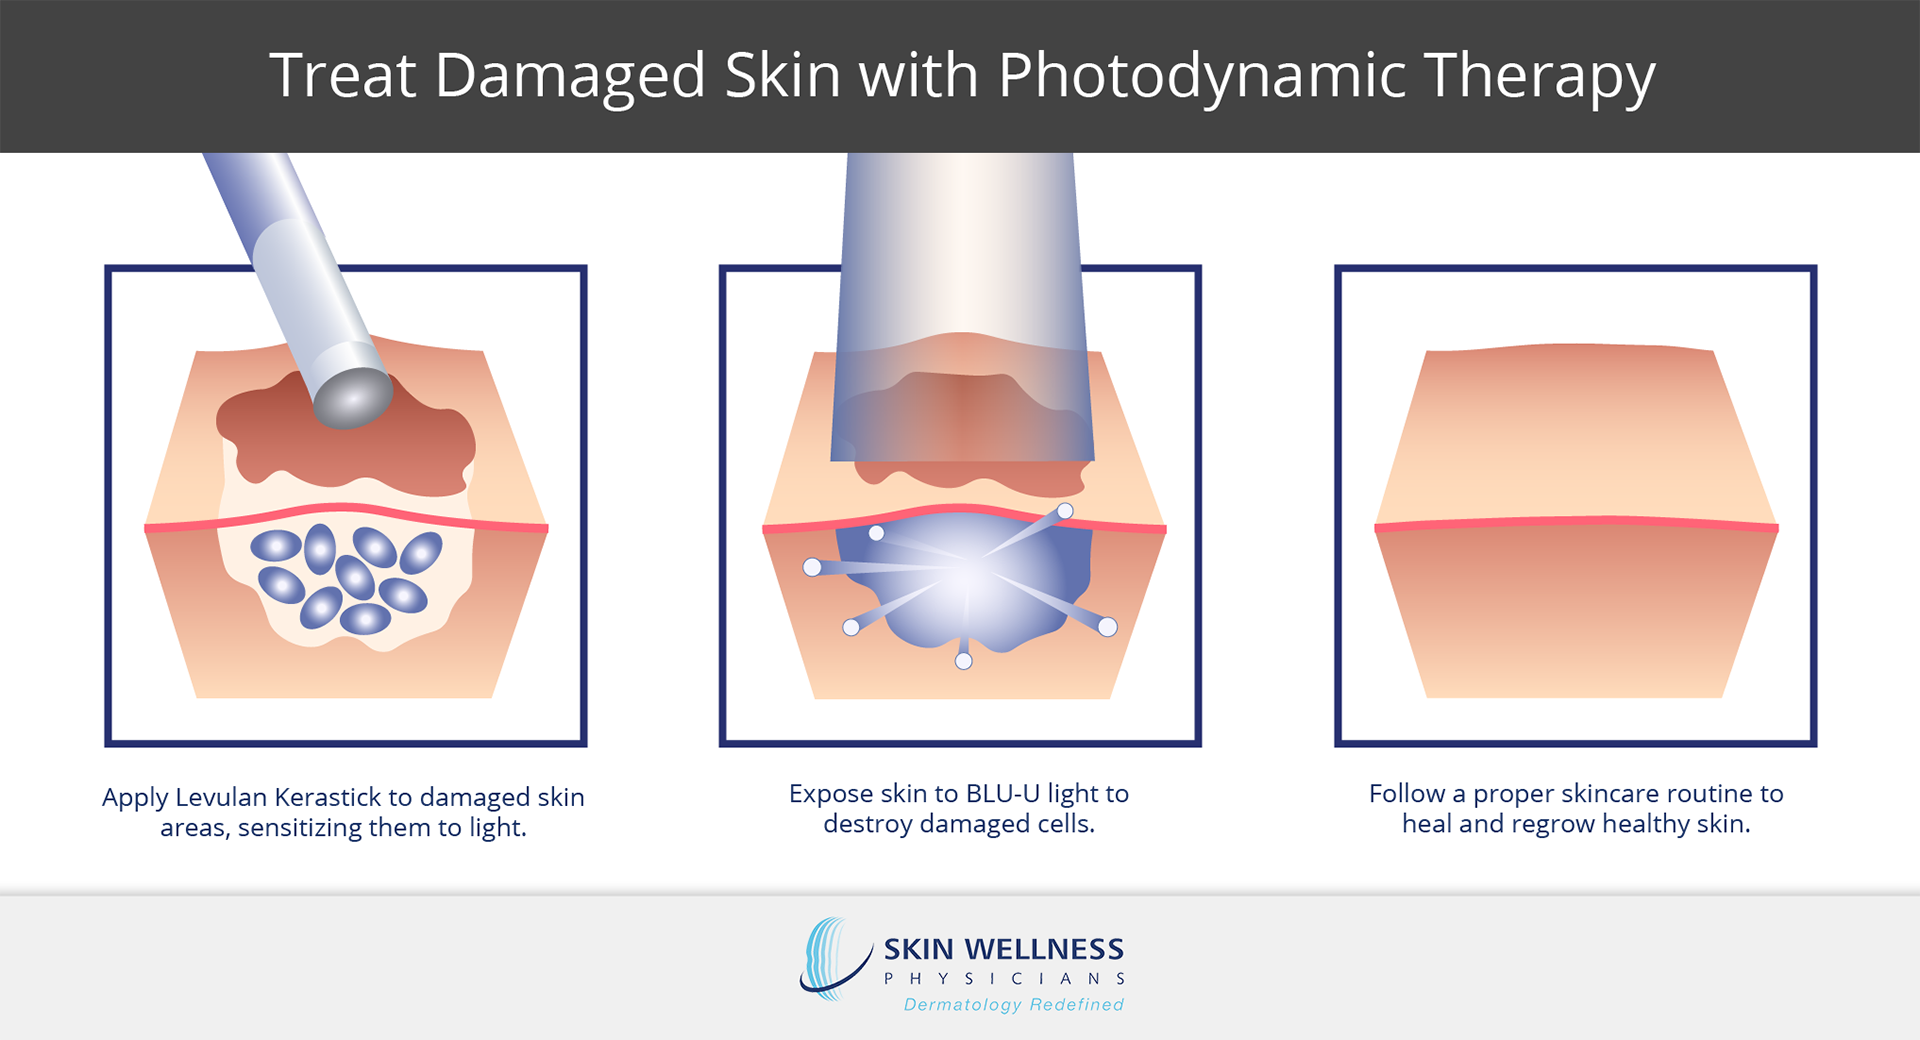 Learn the benefits of photofacial therapy at Florida’s Skin Wellness Physicians.